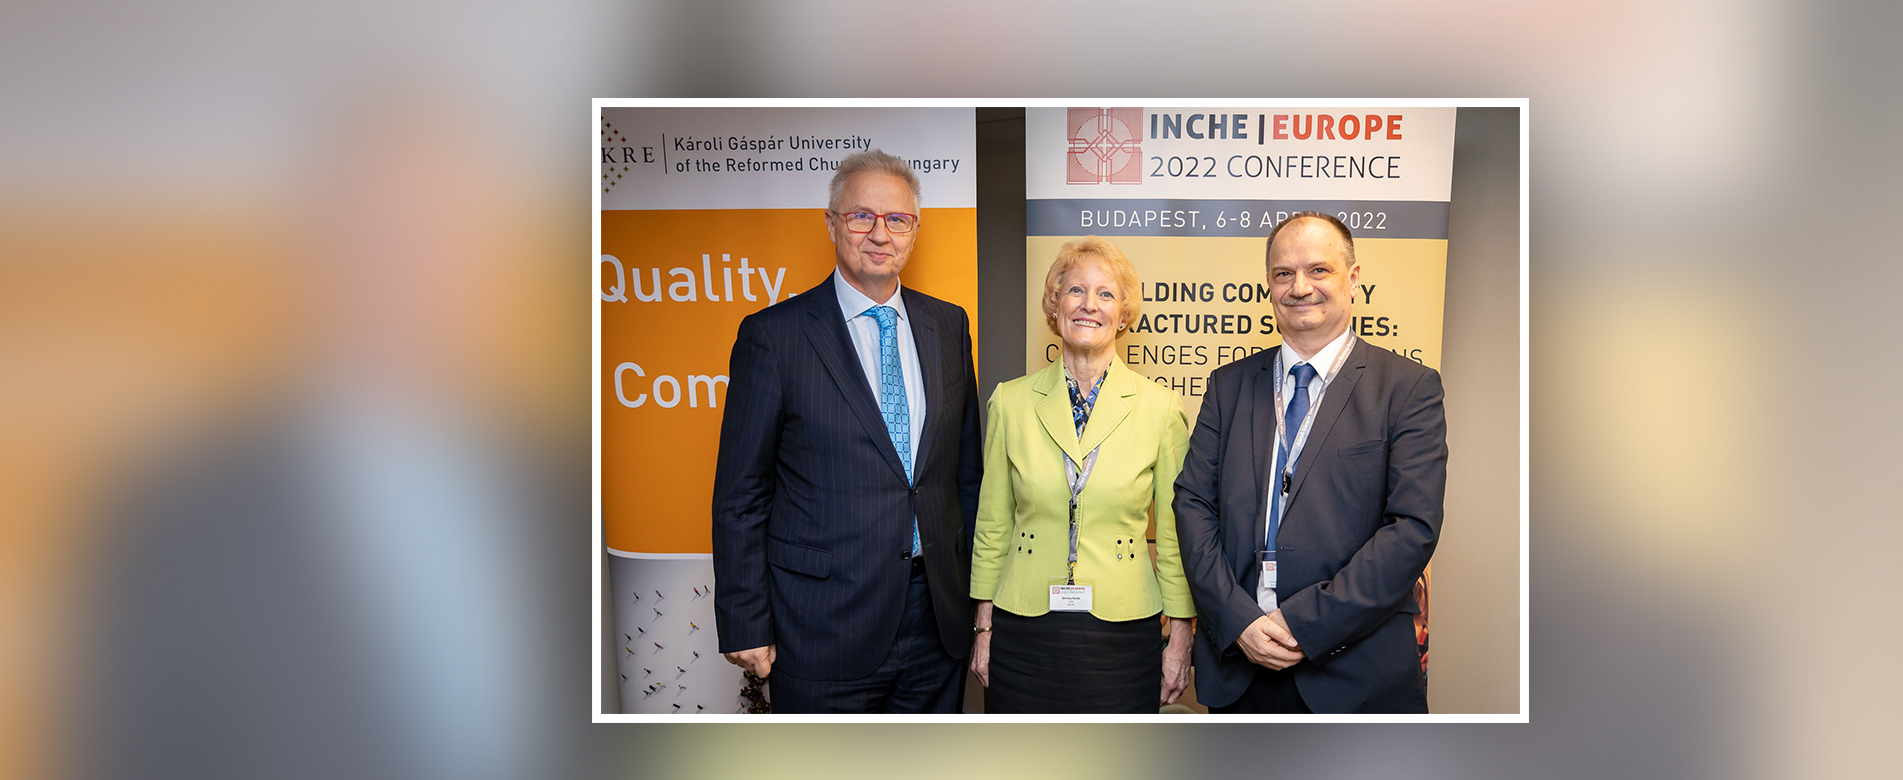   INCHE Europe Conference 2022 was successfully concluded